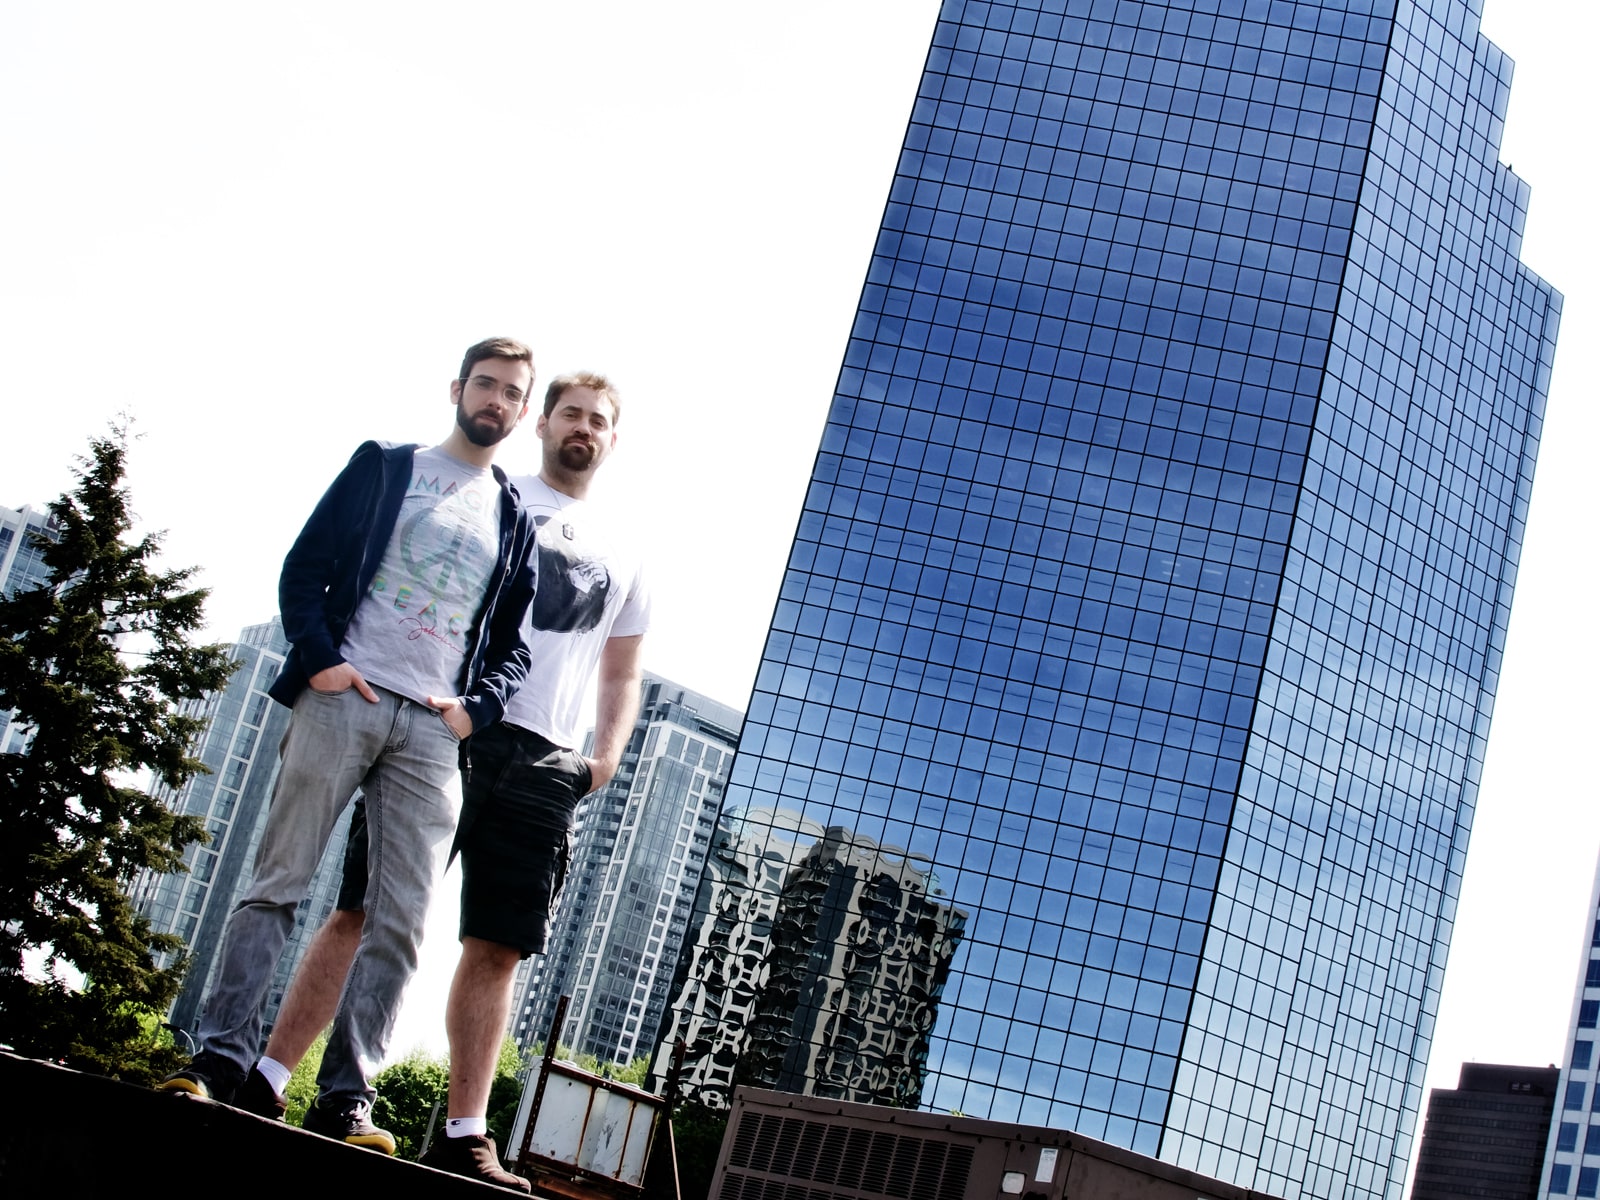 DigiPen alumni Greg Raab and Ryan Fedje standing outside the glass-walled building that houses the Camoflaj office